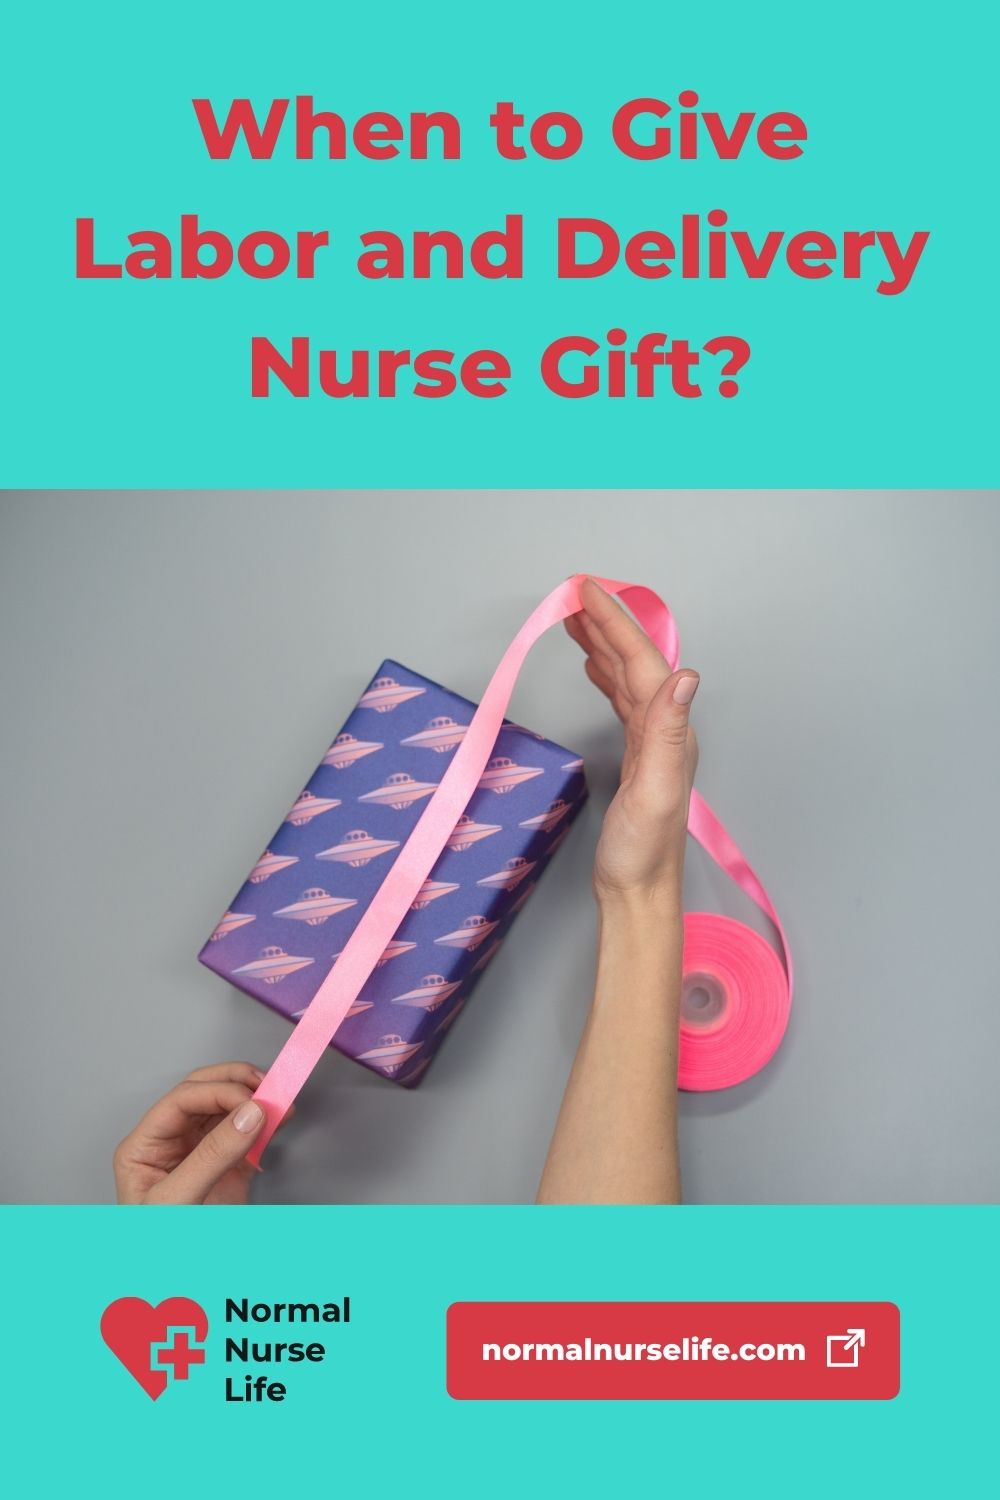 When to give labor and delivery nurse gifts